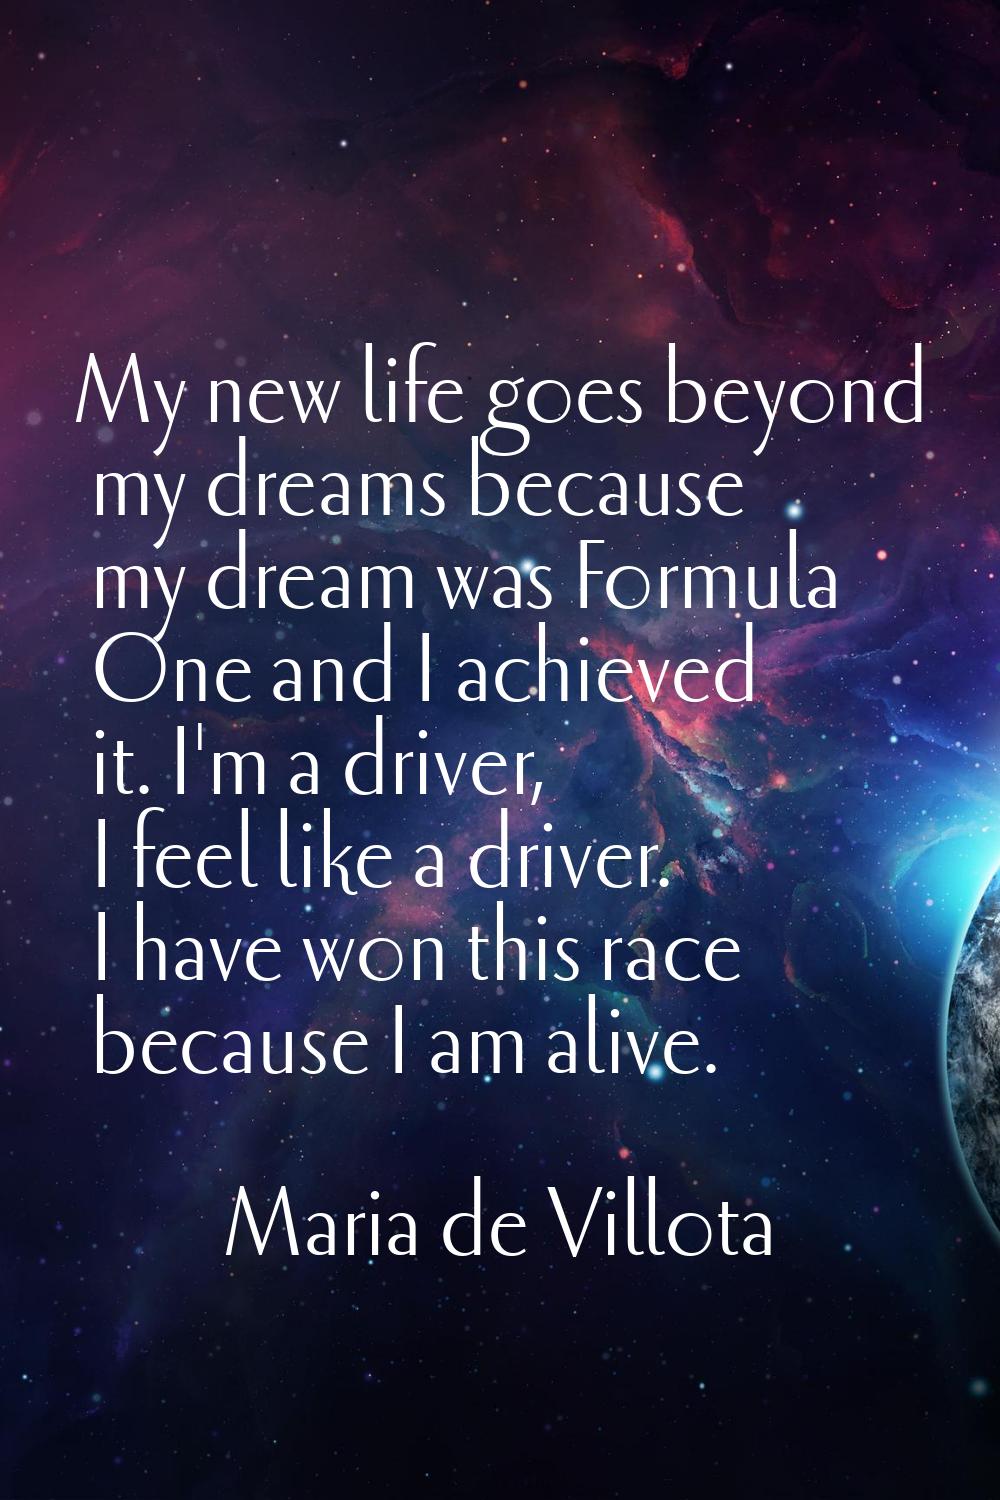 My new life goes beyond my dreams because my dream was Formula One and I achieved it. I'm a driver,